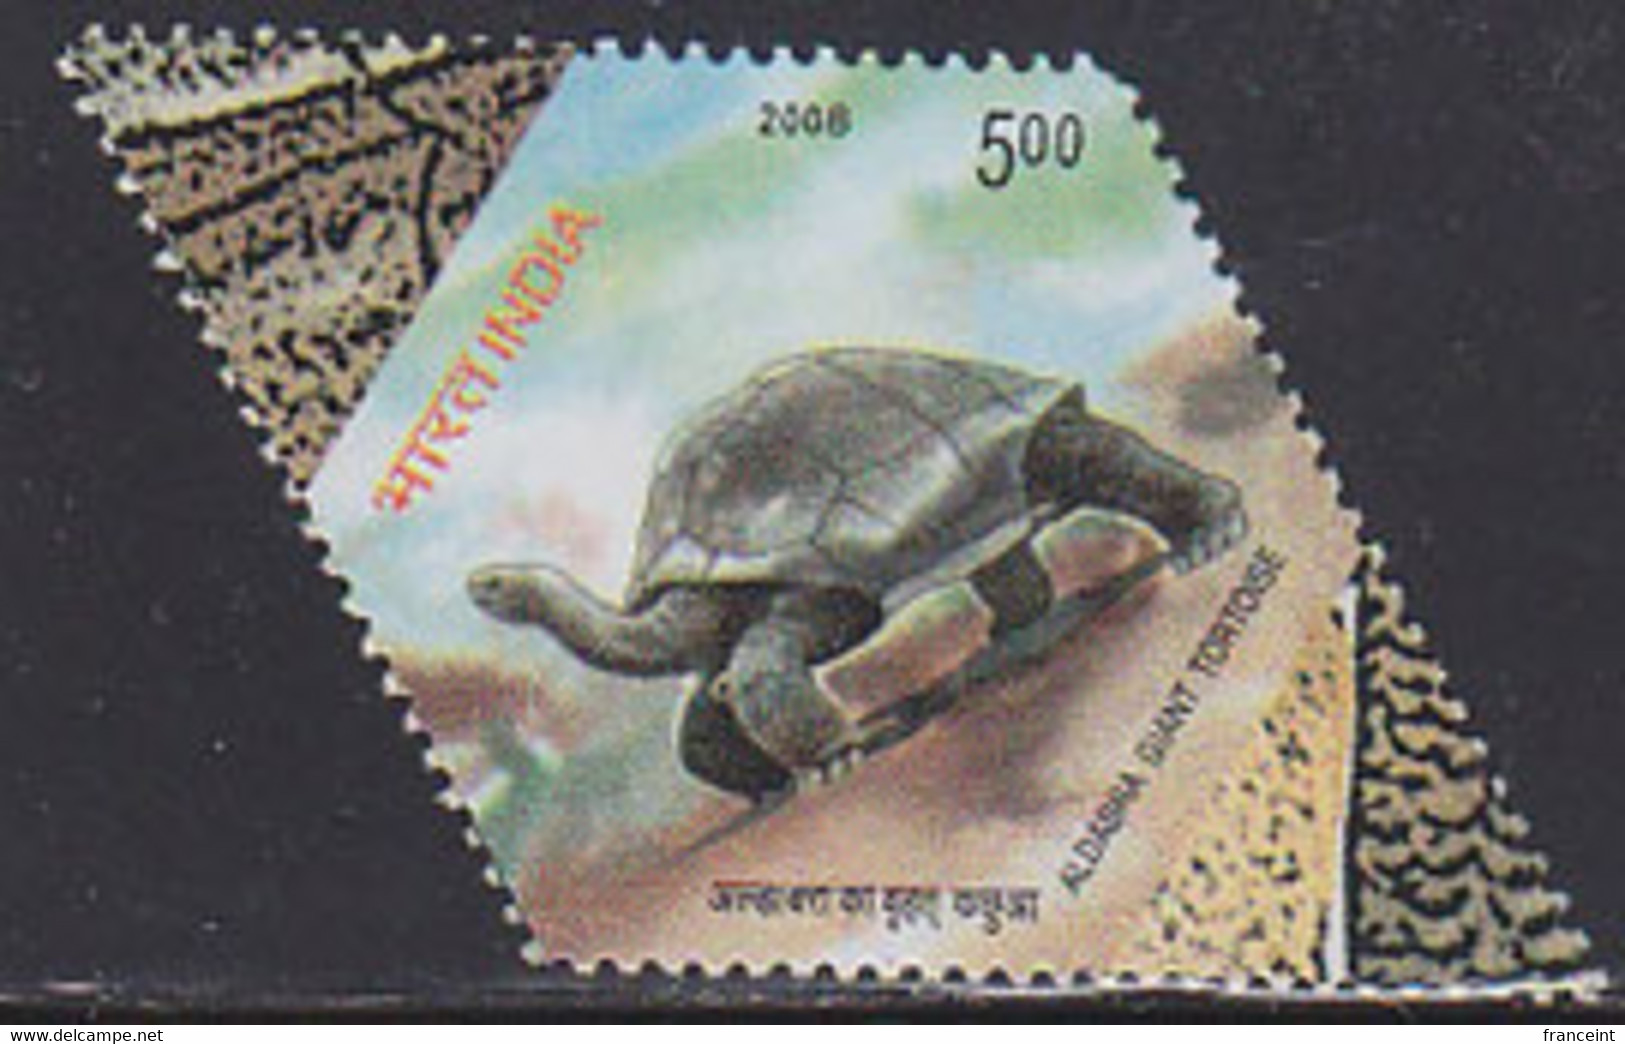 INDIA(2008) Aldabra Giant Tortoise. Hexagonal Stamp With Perforations Missing On 2 Sides - Plaatfouten En Curiosa